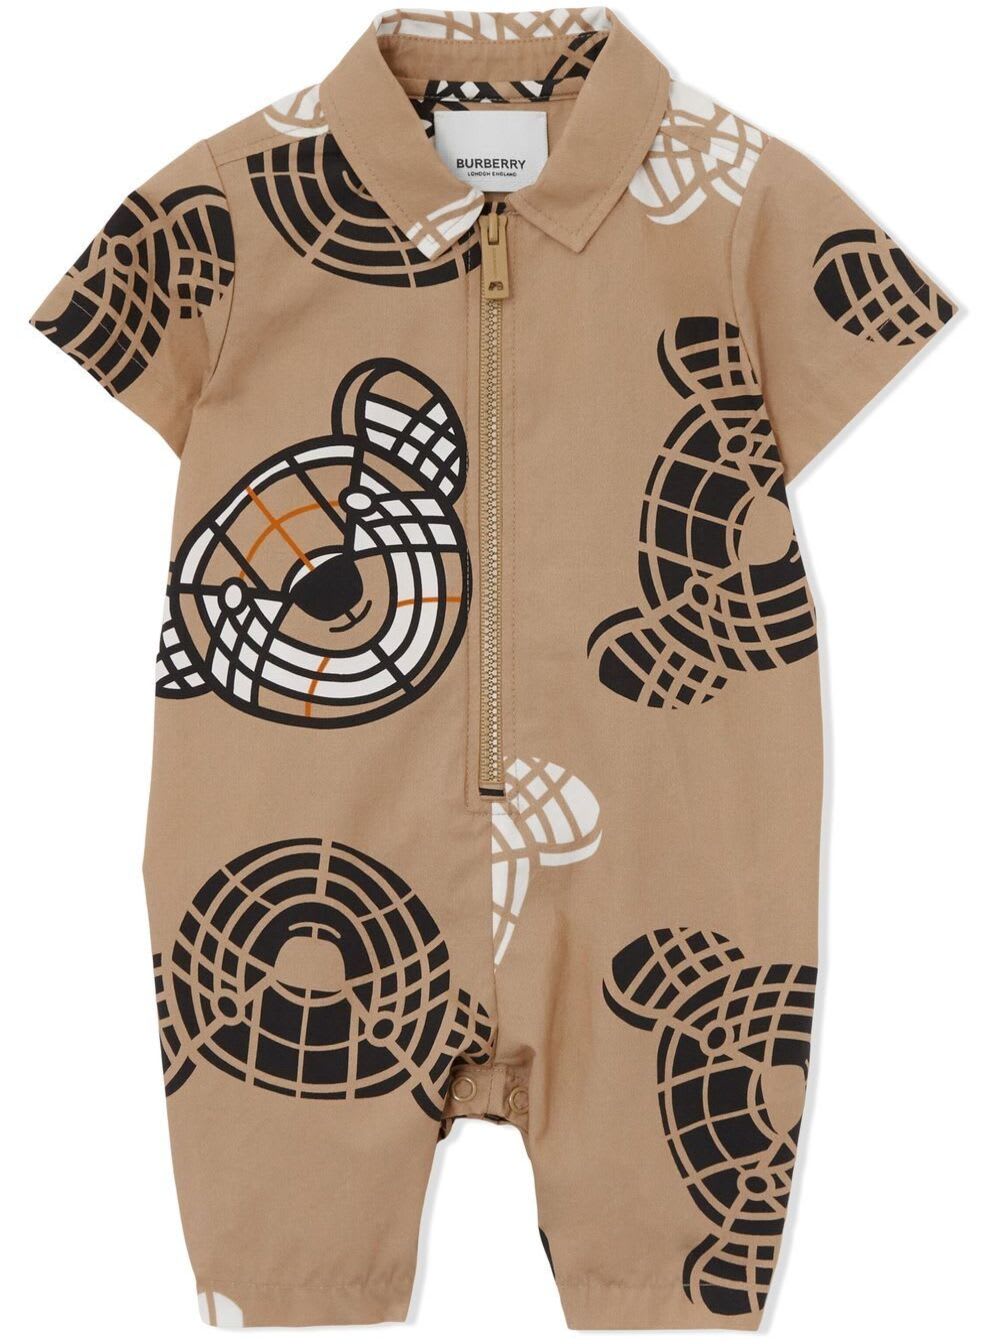 BURBERRY BEIGE ONESIE WITH ALL-OVER TEDDY BEAR PRINT IN COTTON BABY